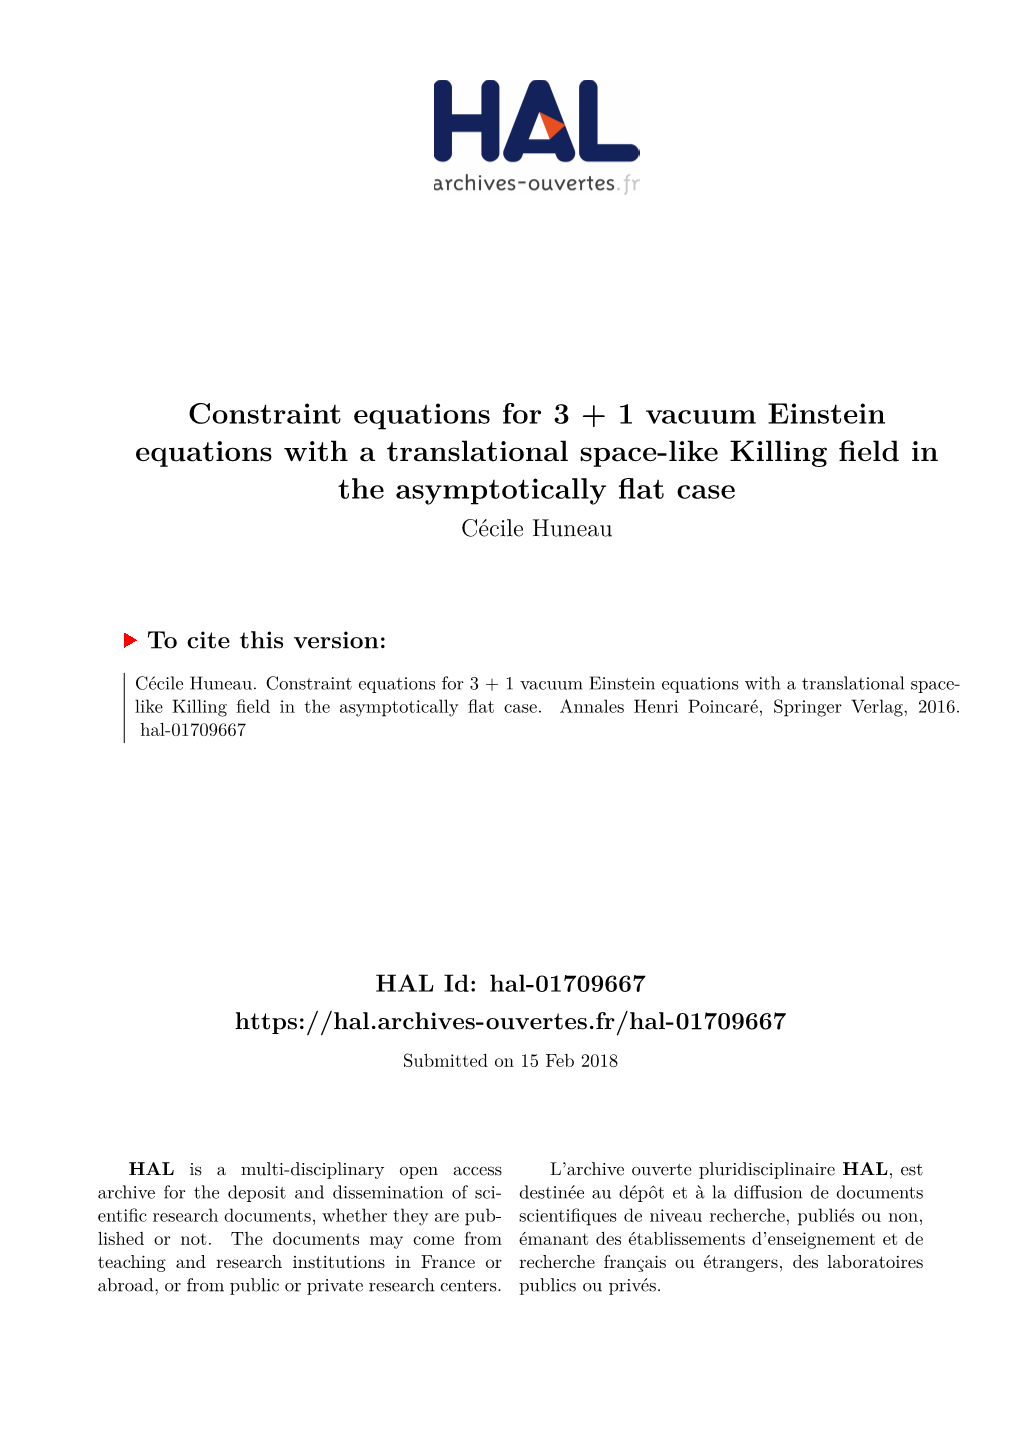 Constraint Equations for 3 + 1 Vacuum Einstein Equations with a Translational Space-Like Killing Field in the Asymptotically Flat Case Cécile Huneau